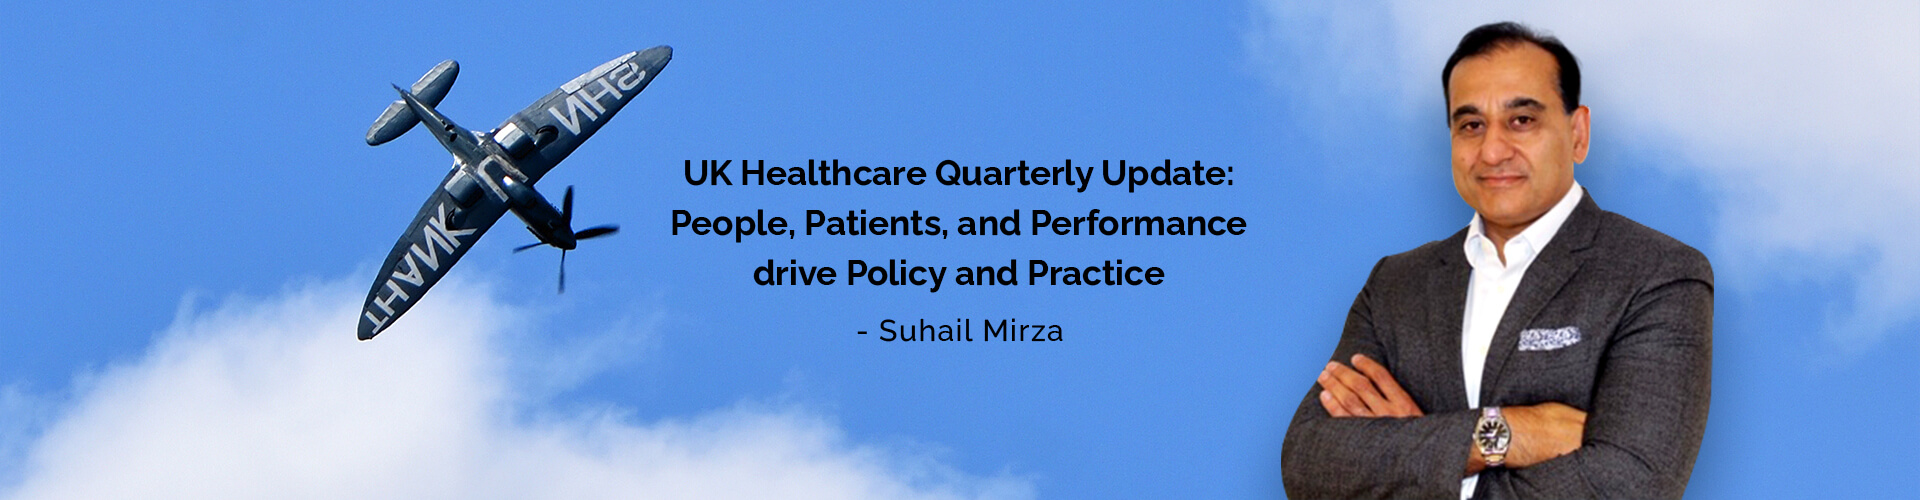 UK Healthcare Quarterly Update: People, Patients, and Performance drive Policy and Practice